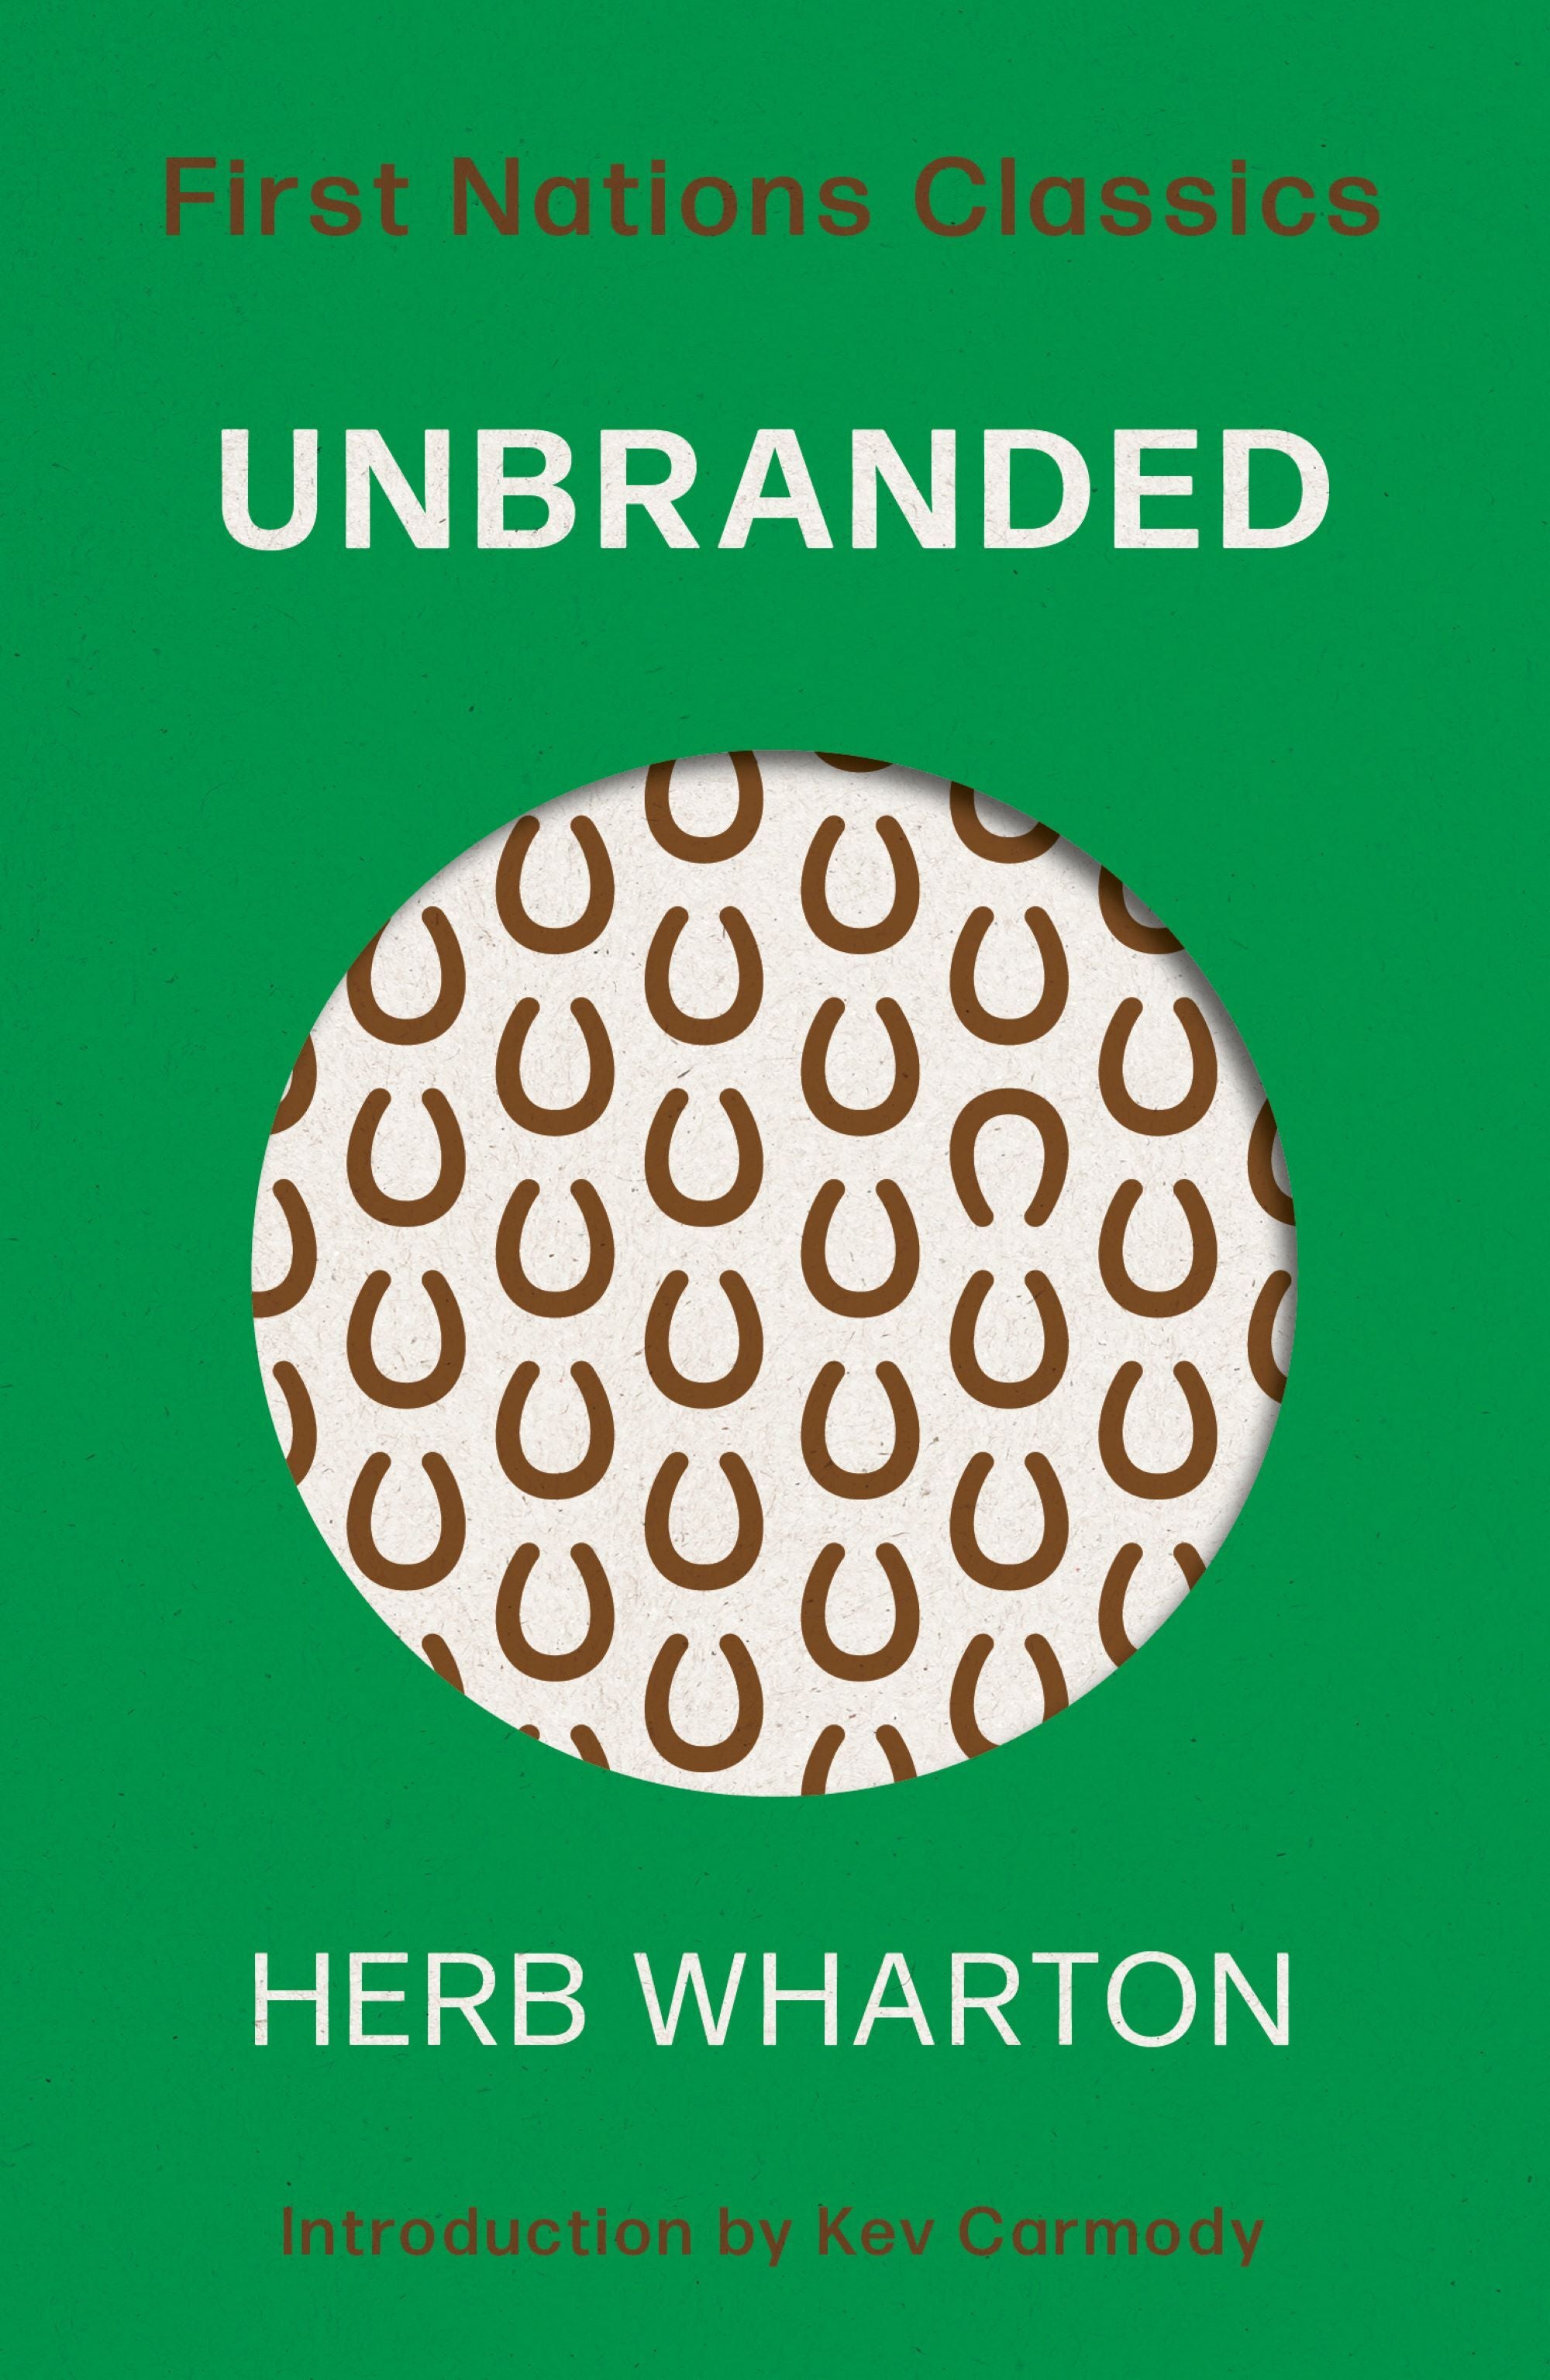 Unbranded: First Nations Classics